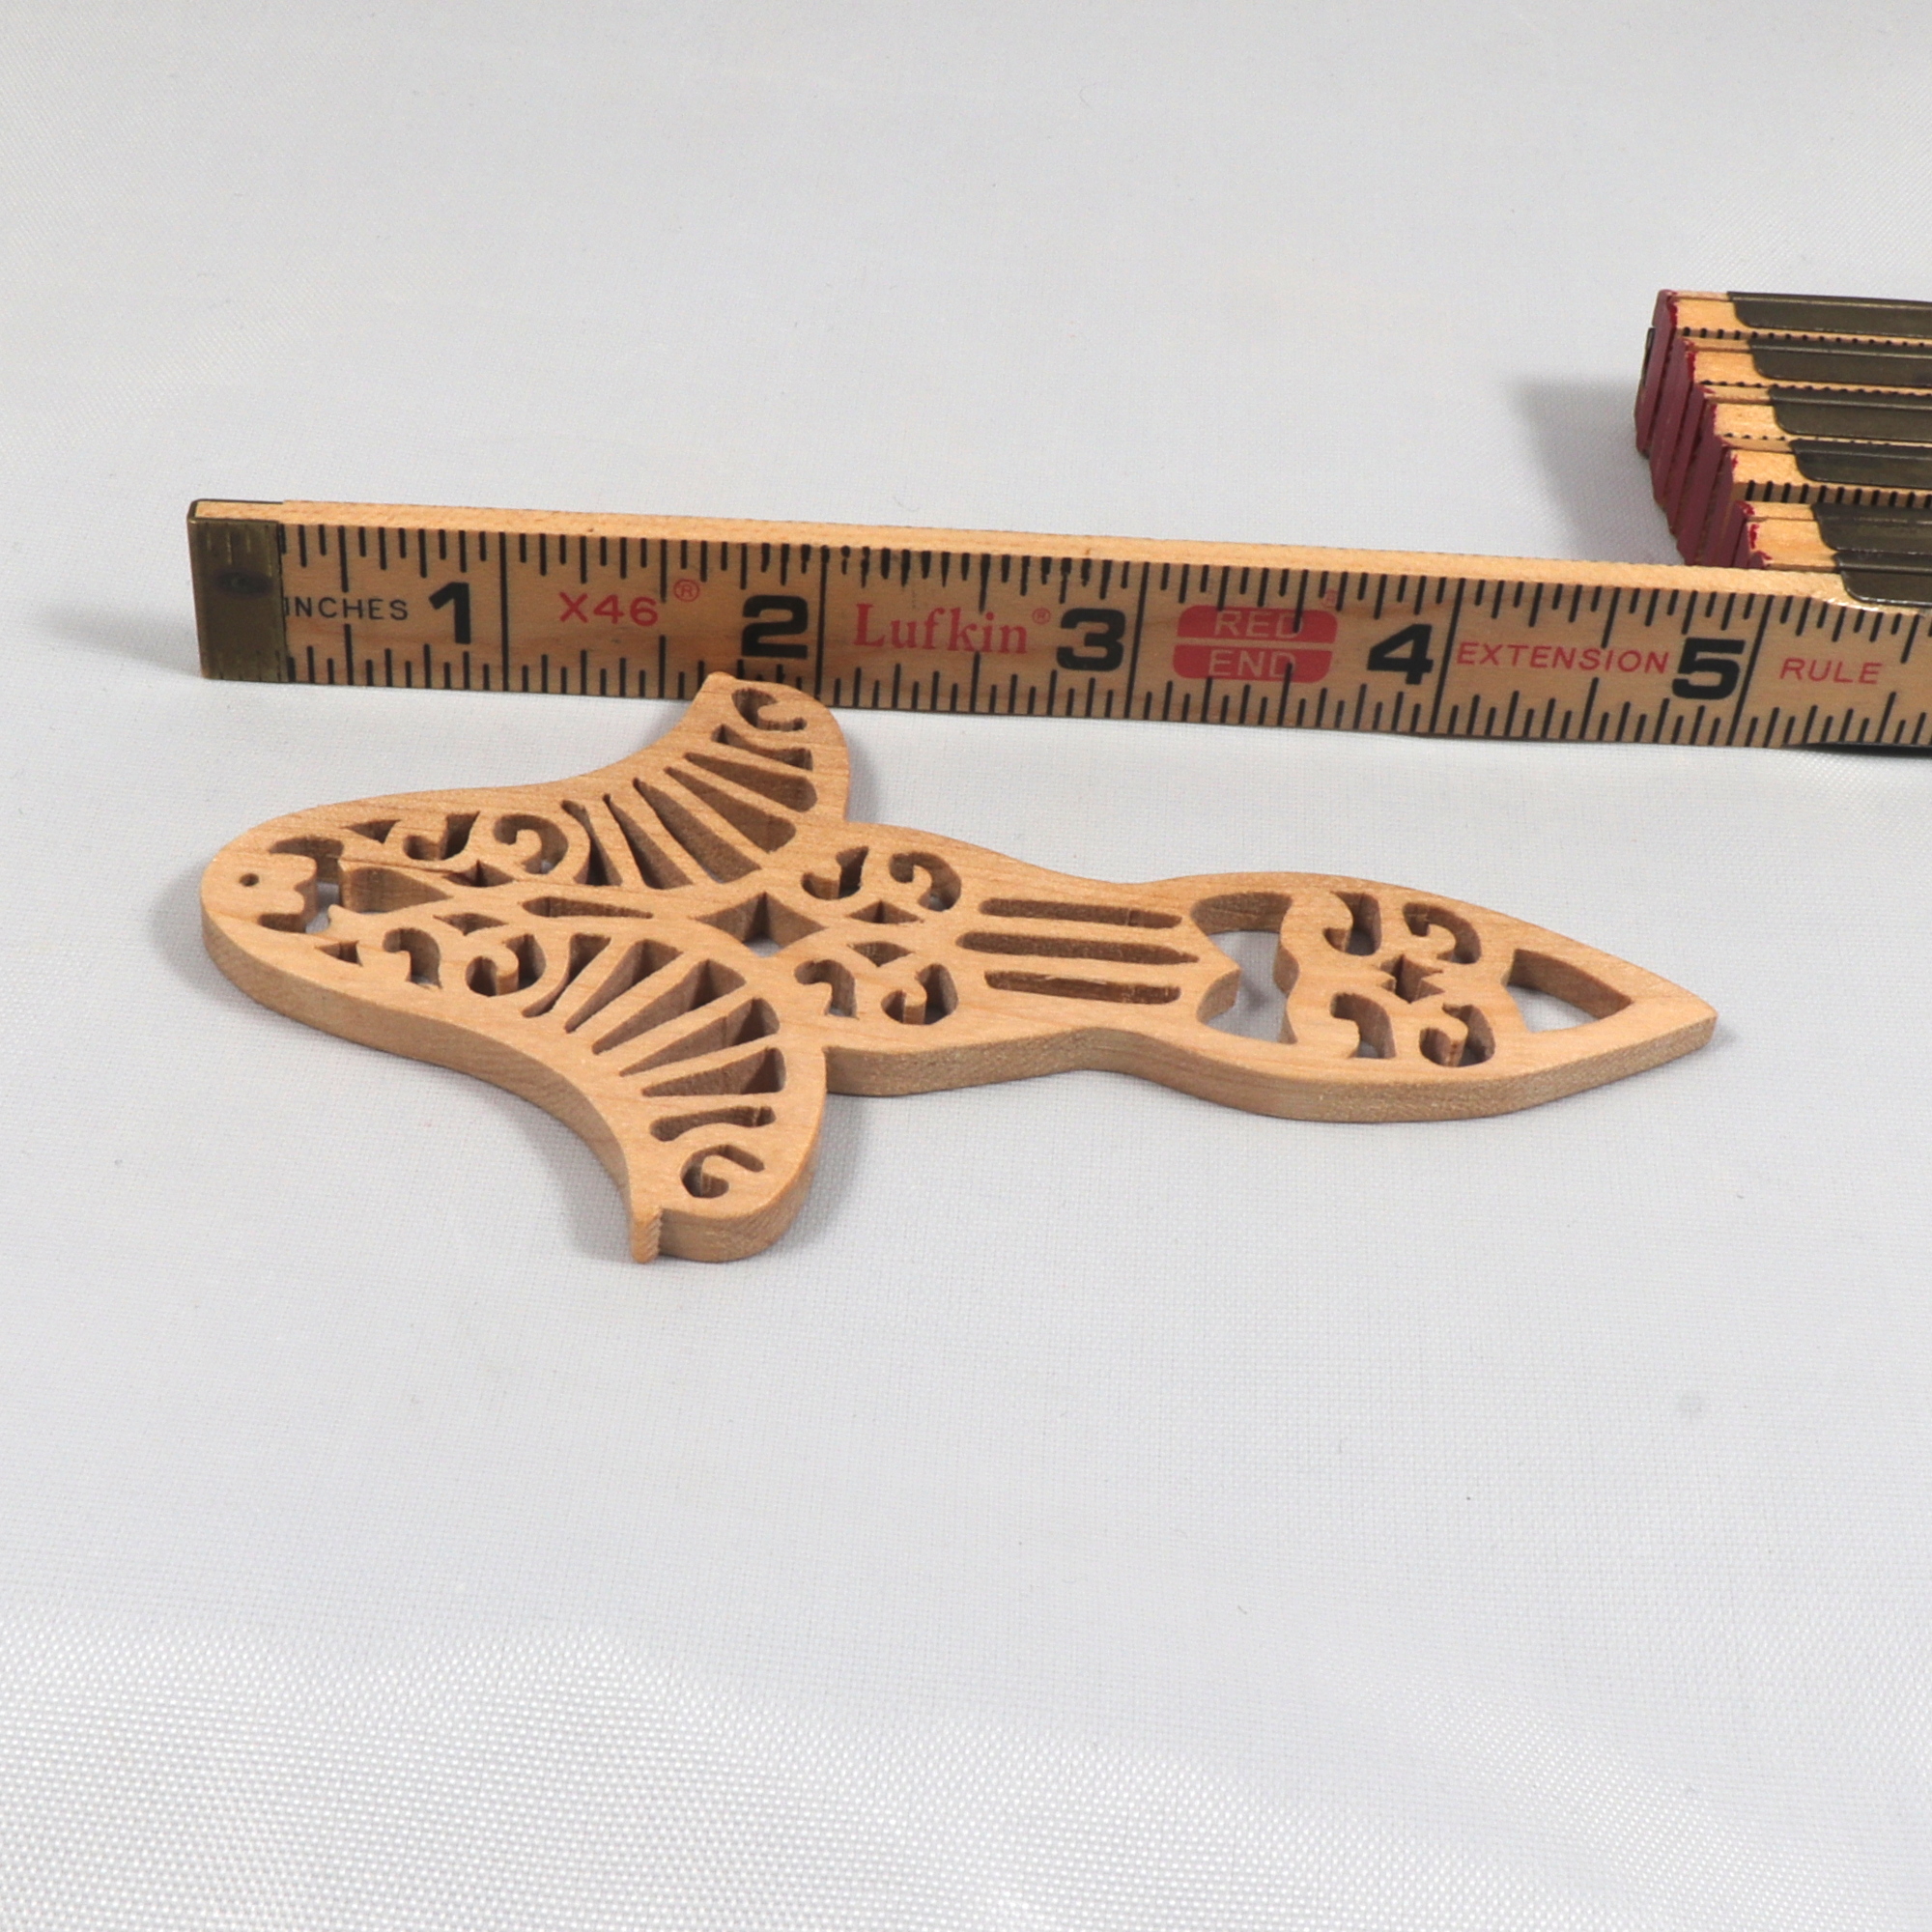 Handmade Wood Fretwork Victorian Icicle style Christmas tree ornament hand finished with clear shellac.